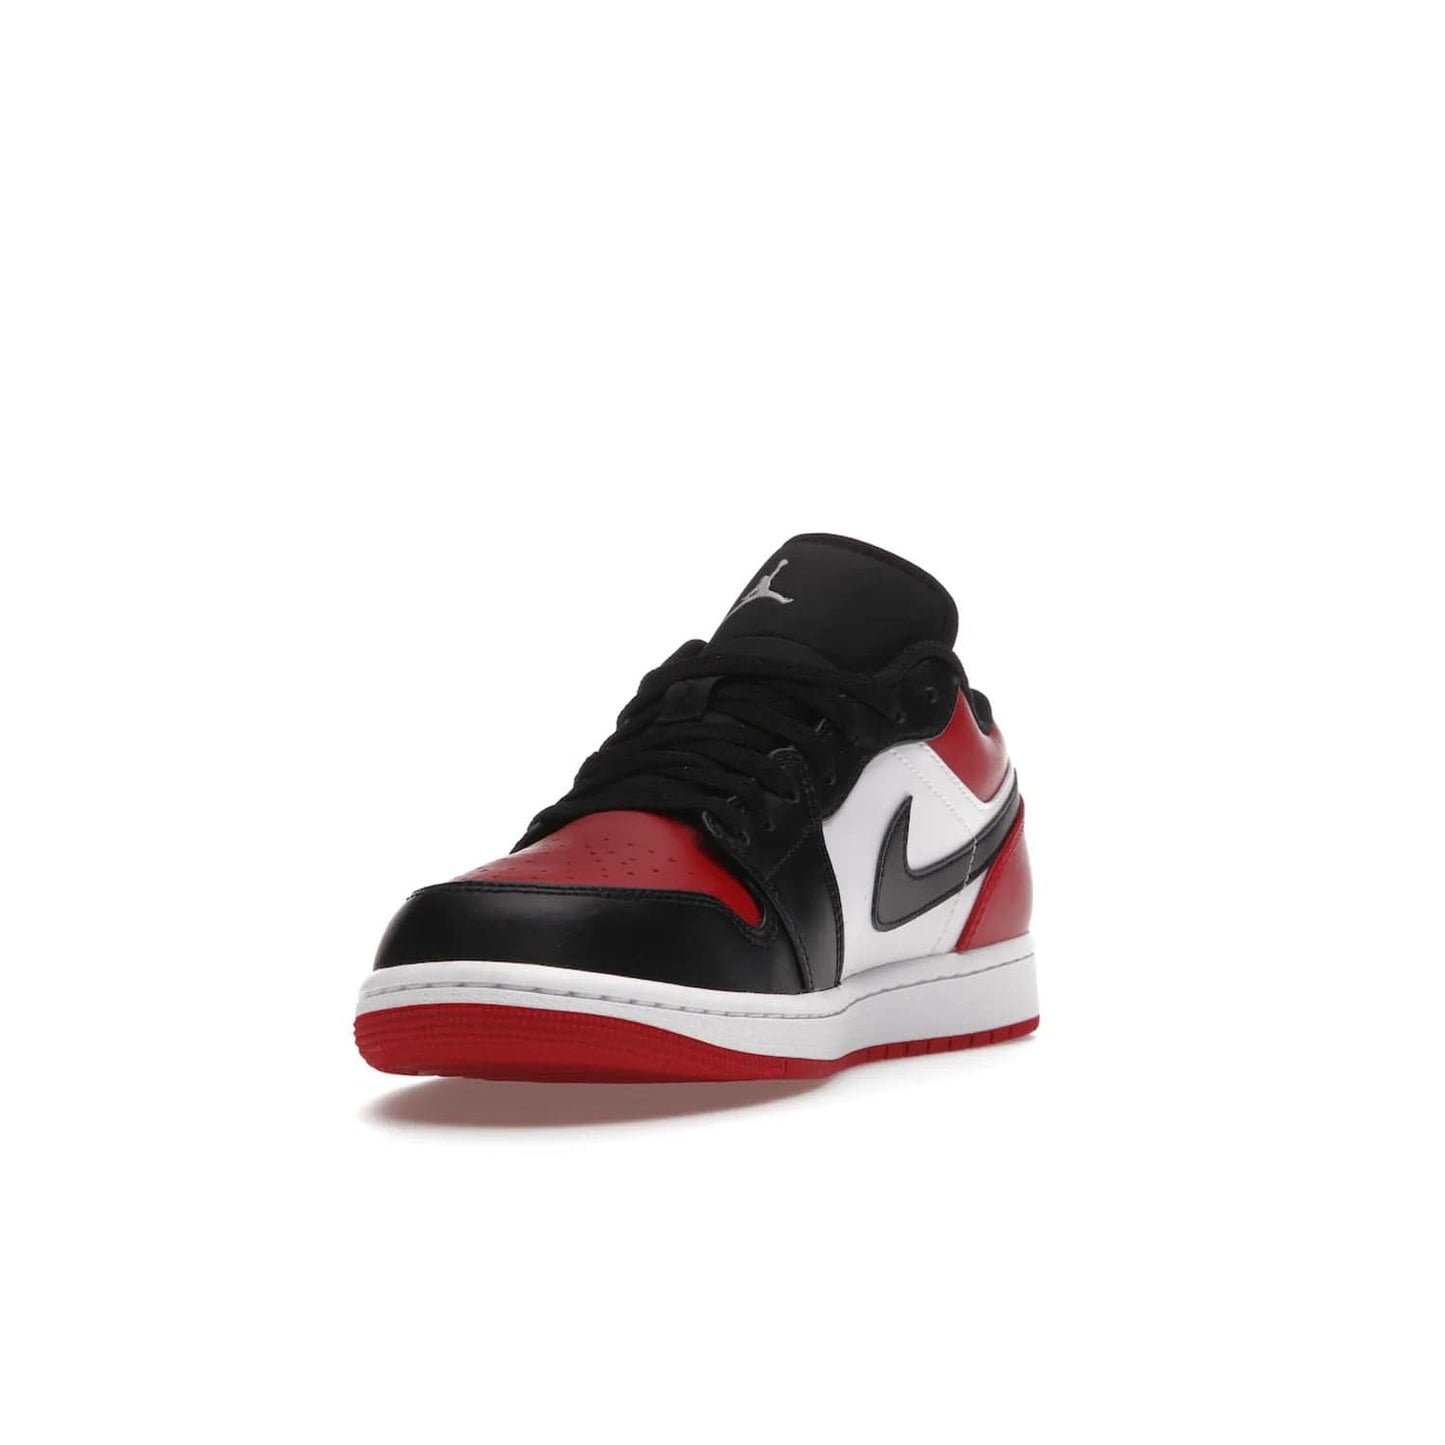 Jordan 1 Low Bred Toe - Image 13 - Only at www.BallersClubKickz.com - Step into the iconic Jordan 1 Retro. Mixing and matching of leather in red, black, and white makes for a unique colorway. Finished off with a Wing logo embroidery & Jumpman label. Comfortable and stylish at an affordable $100, the Jordan 1 Low Bred Toe is perfect for any true sneaker fan.